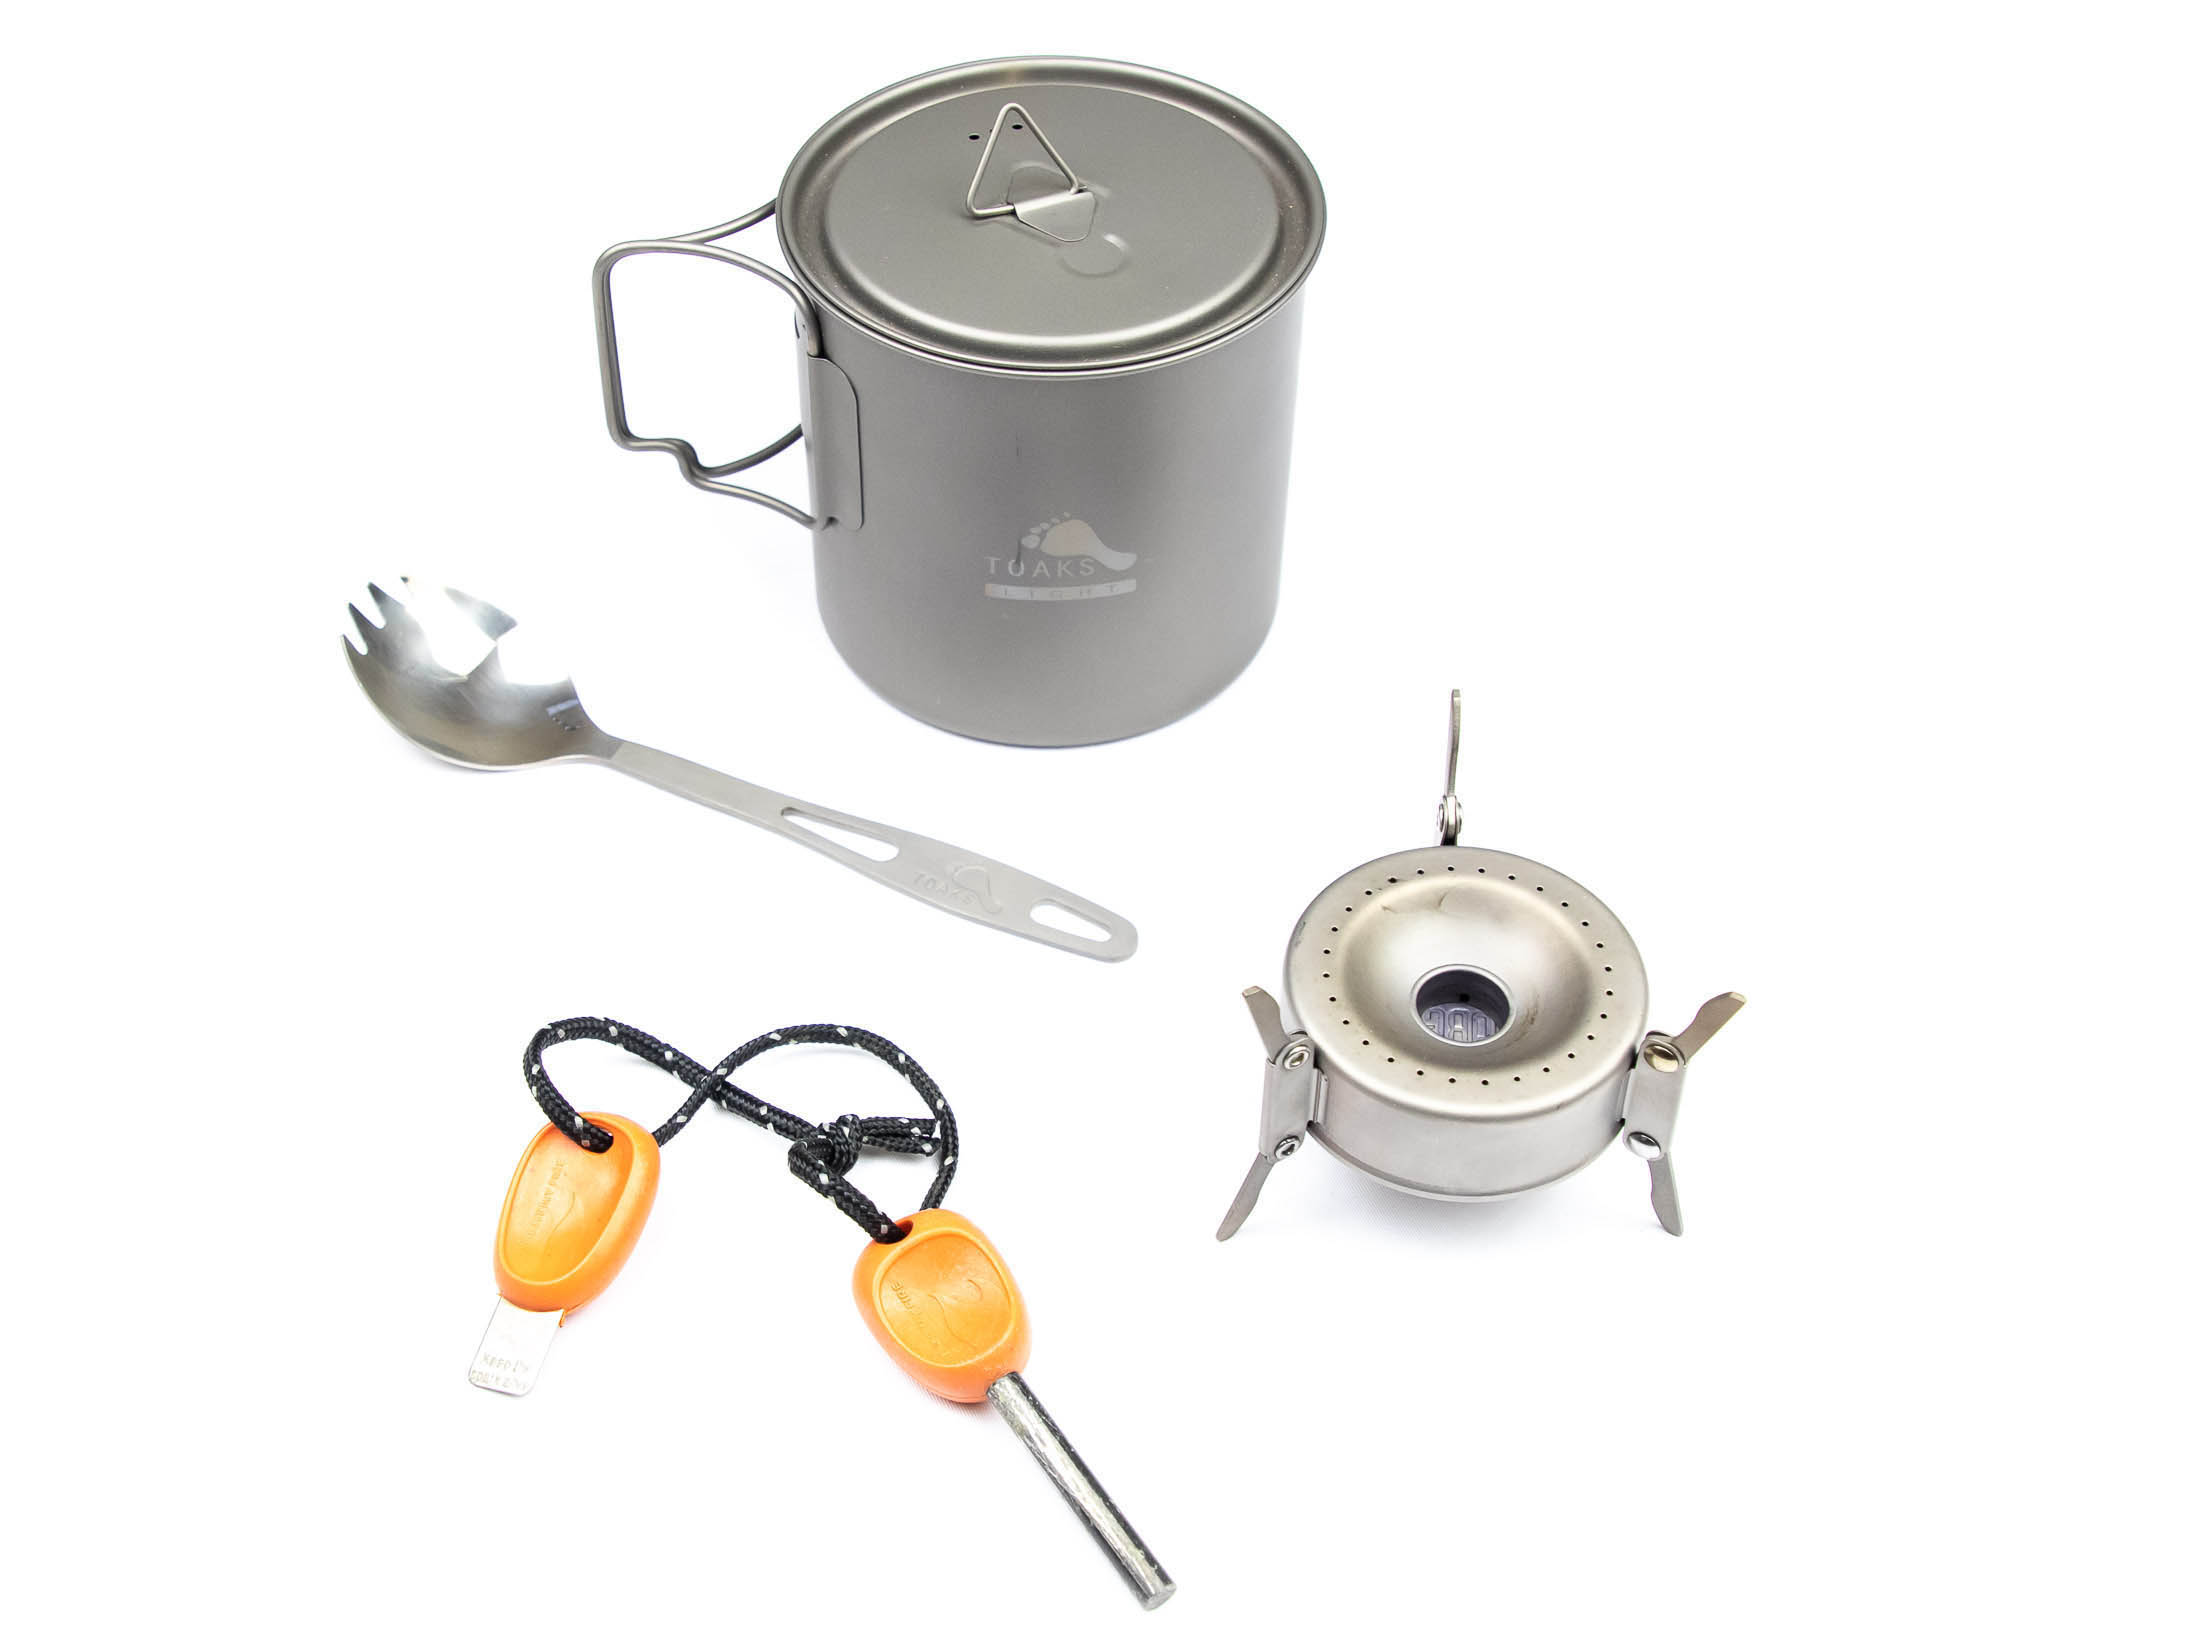 ultralight pot and stove